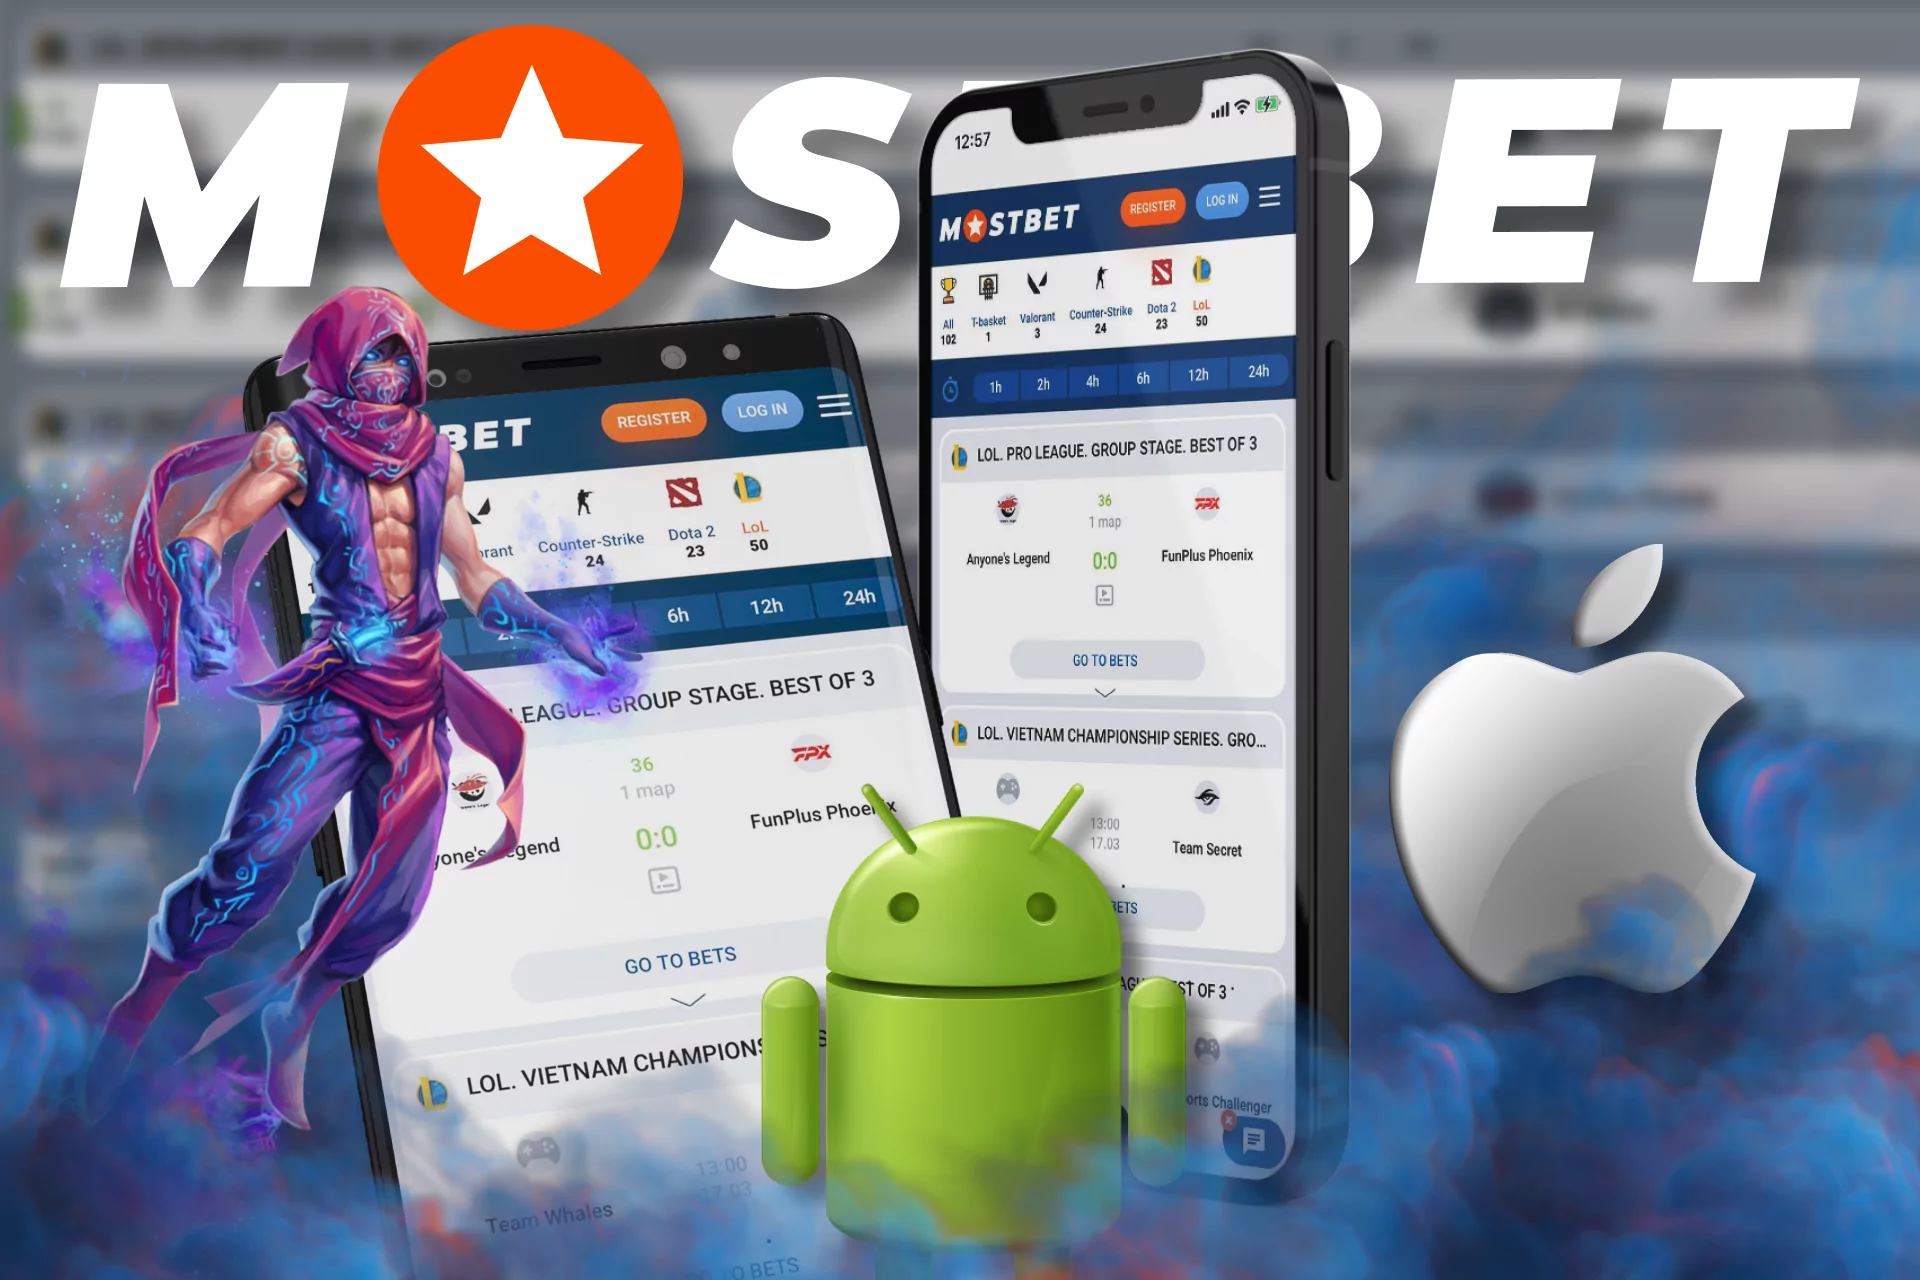 With Mostbet you can bet on the League of Legends directly on your mobile phone through the app.